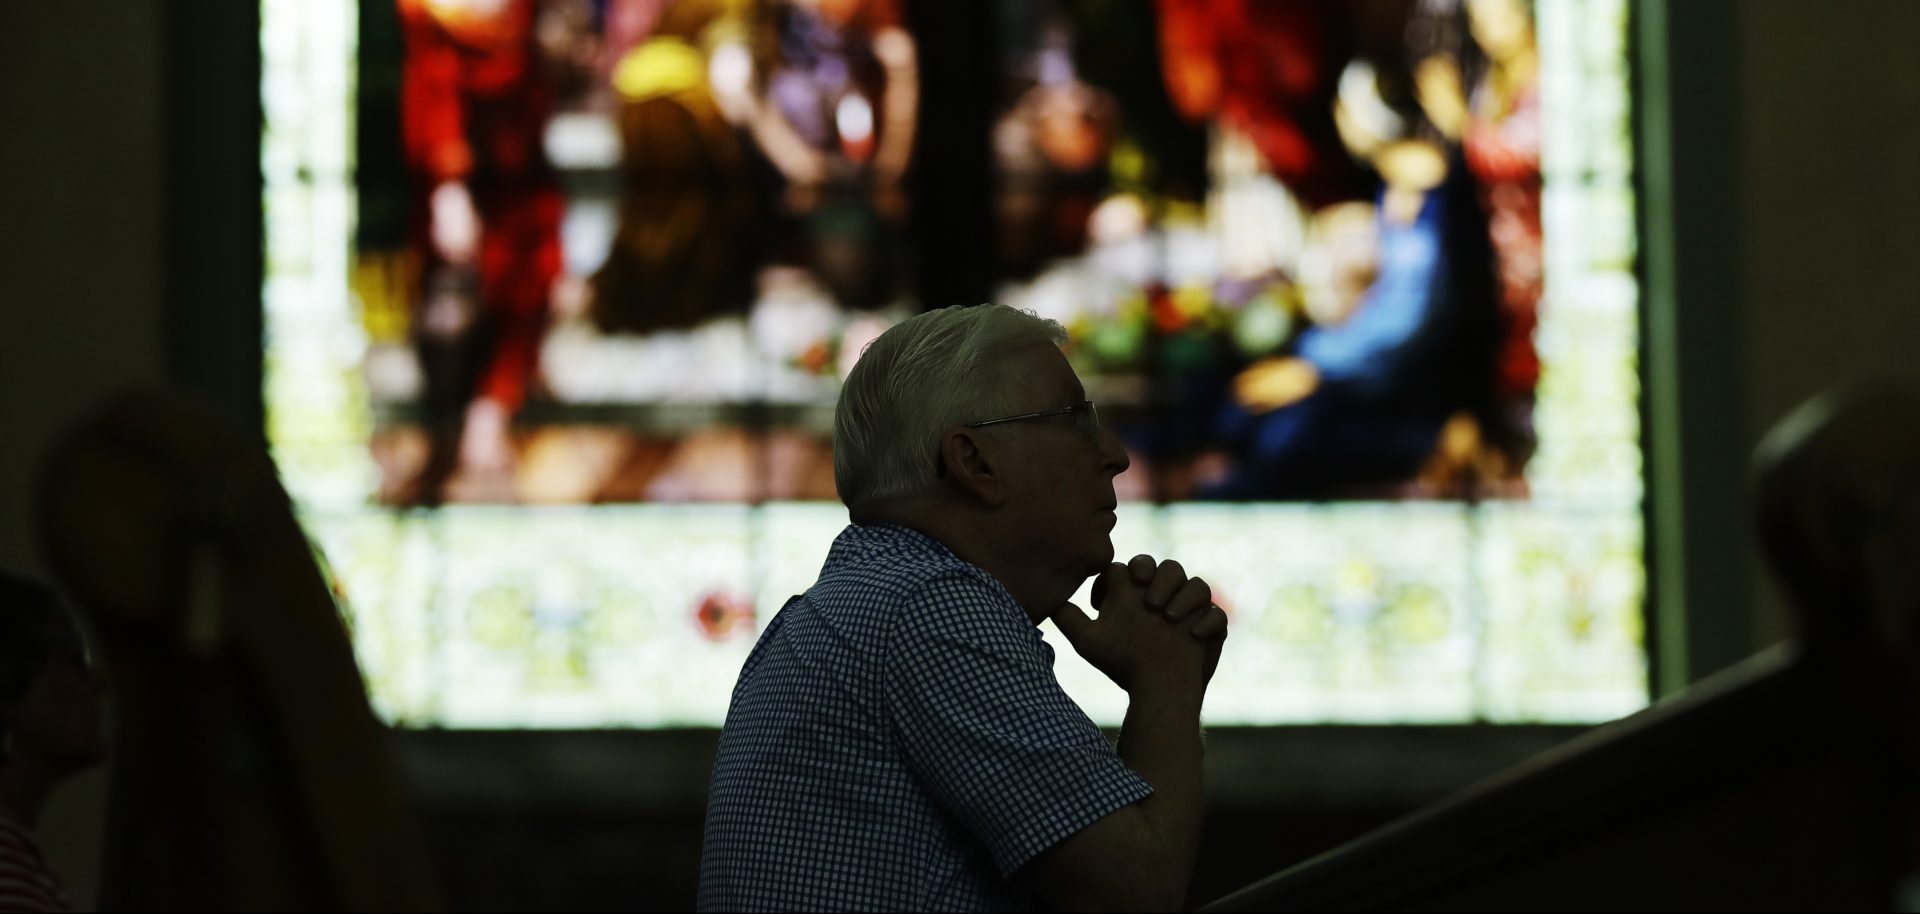 A parishioner prays ahead of a mass celebrated by Bishop Ronald Gainer, of the Harrisburg Diocese, at the Cathedral Church of Saint Patrick in Harrisburg, Pa., Friday, Aug. 17, 2018.